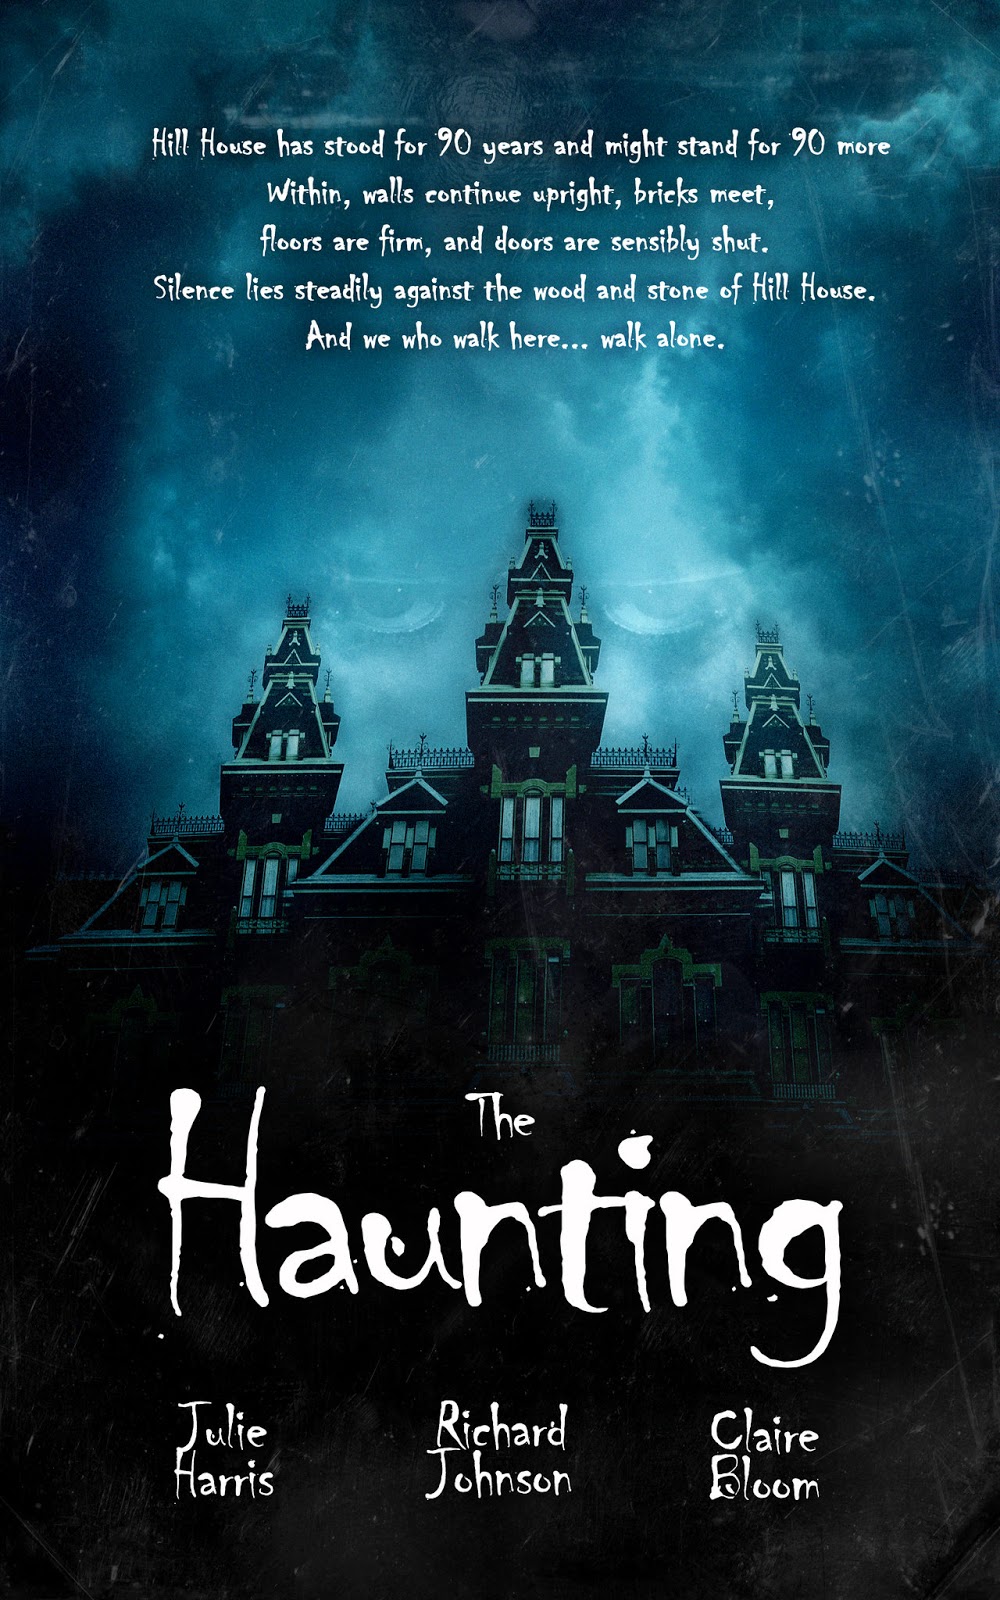 My Movie Review imdb copyright The Haunting (1999)